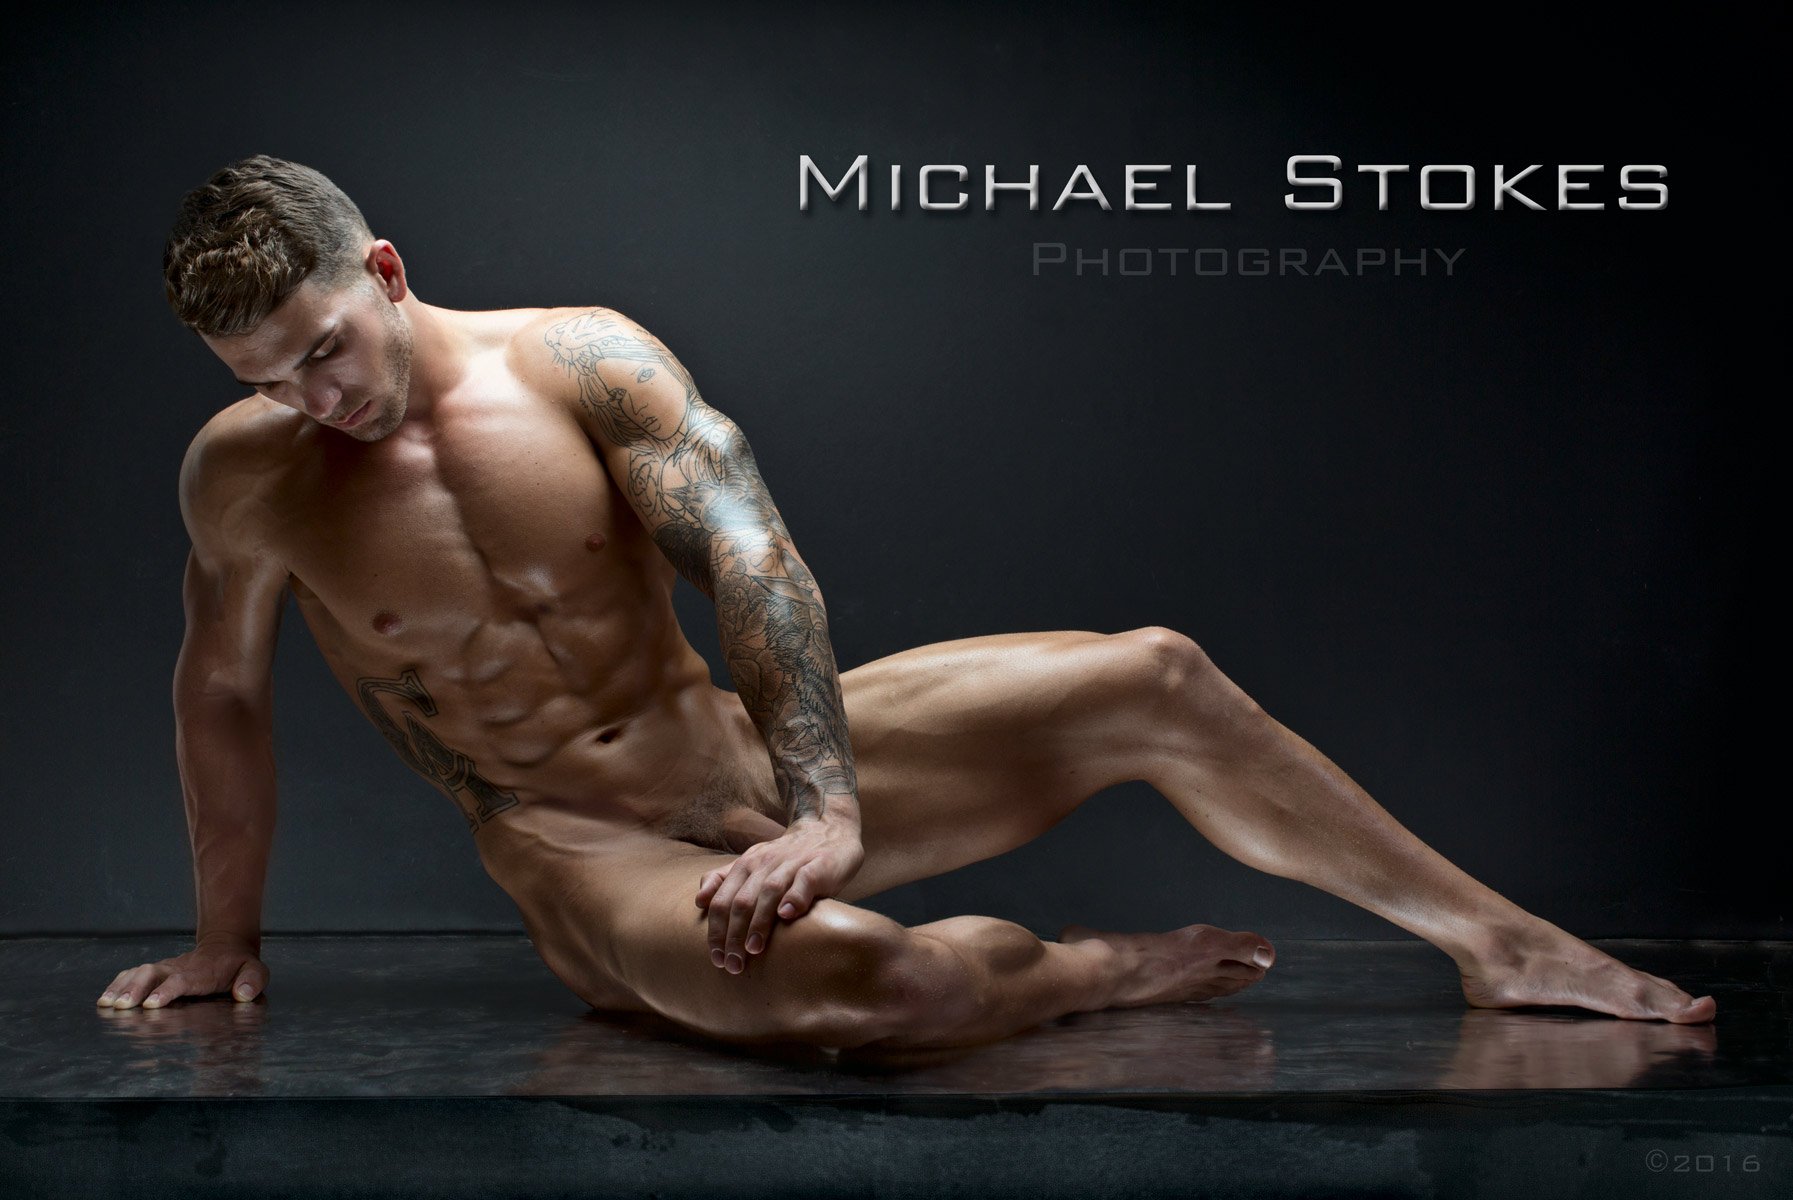 Michael stokes photography twitter